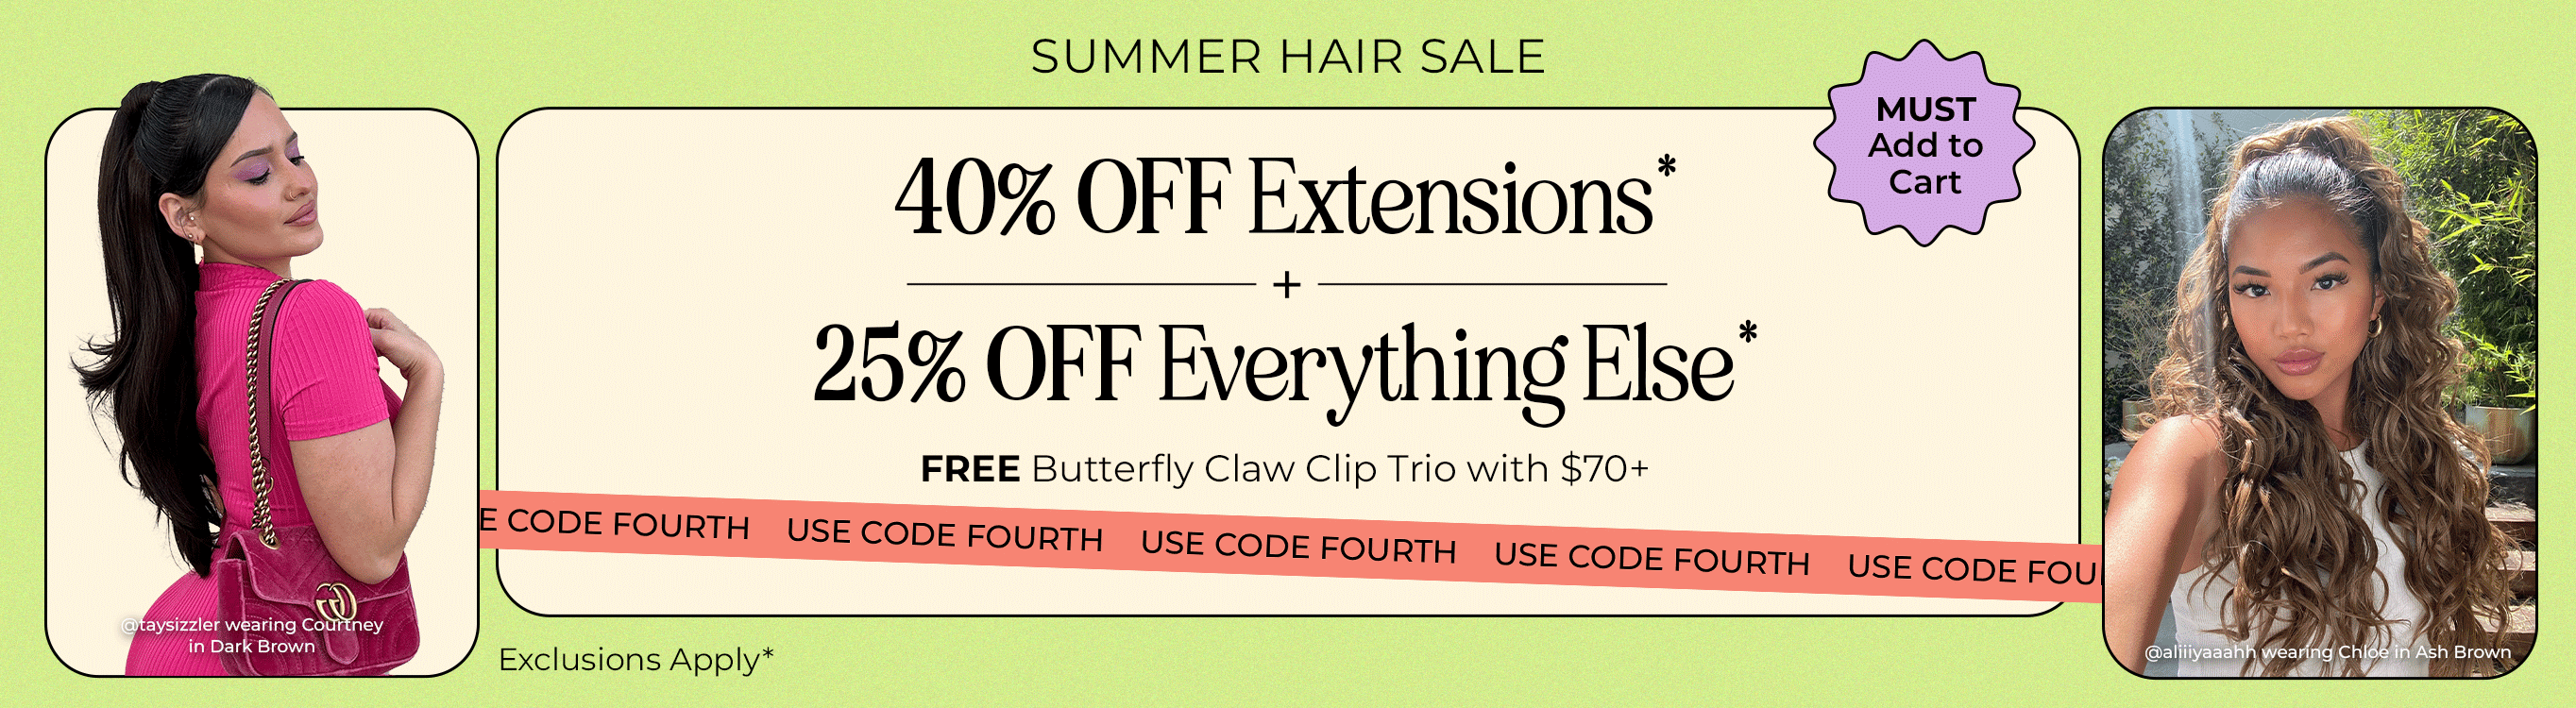 40% OFF EXTENSIONS + 25% OFF EVERYTHING ELSE